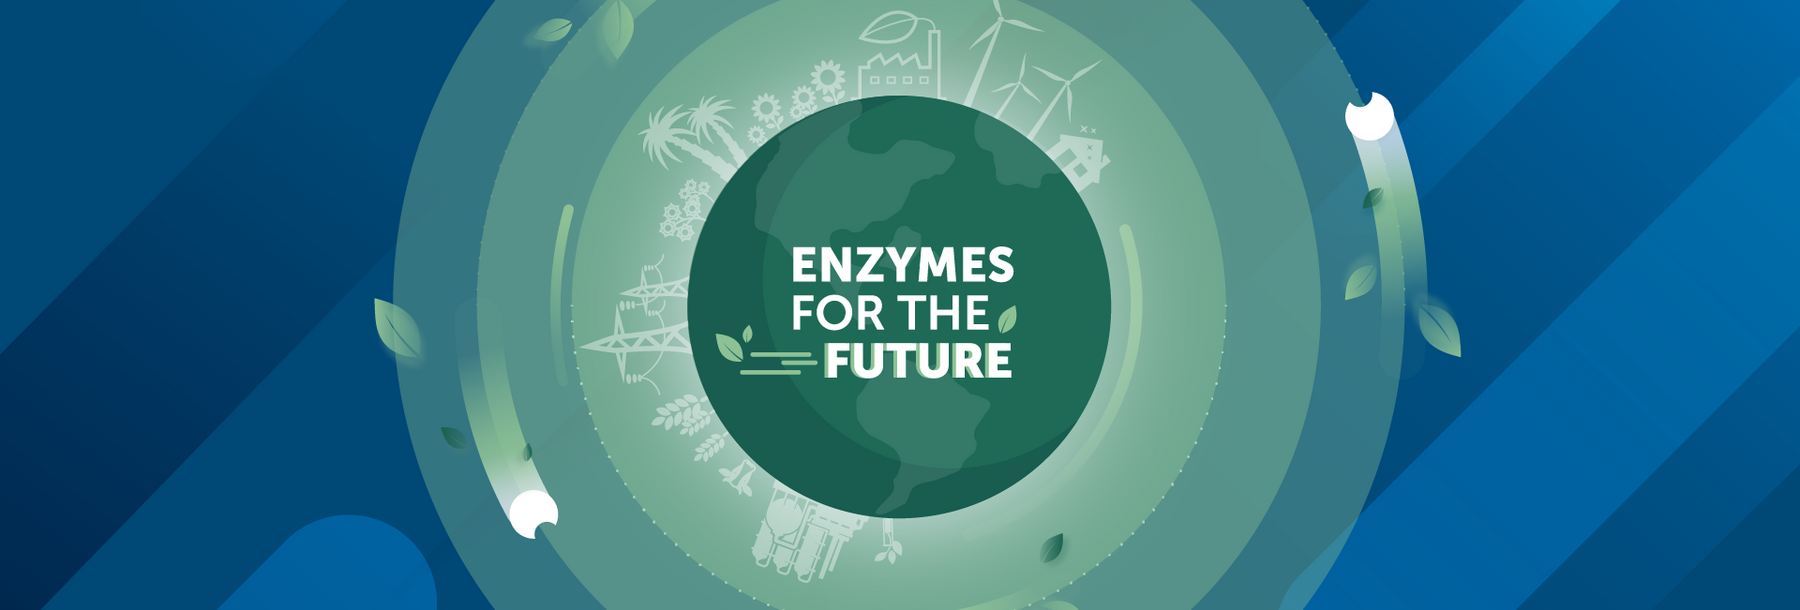 Enzymes for the future